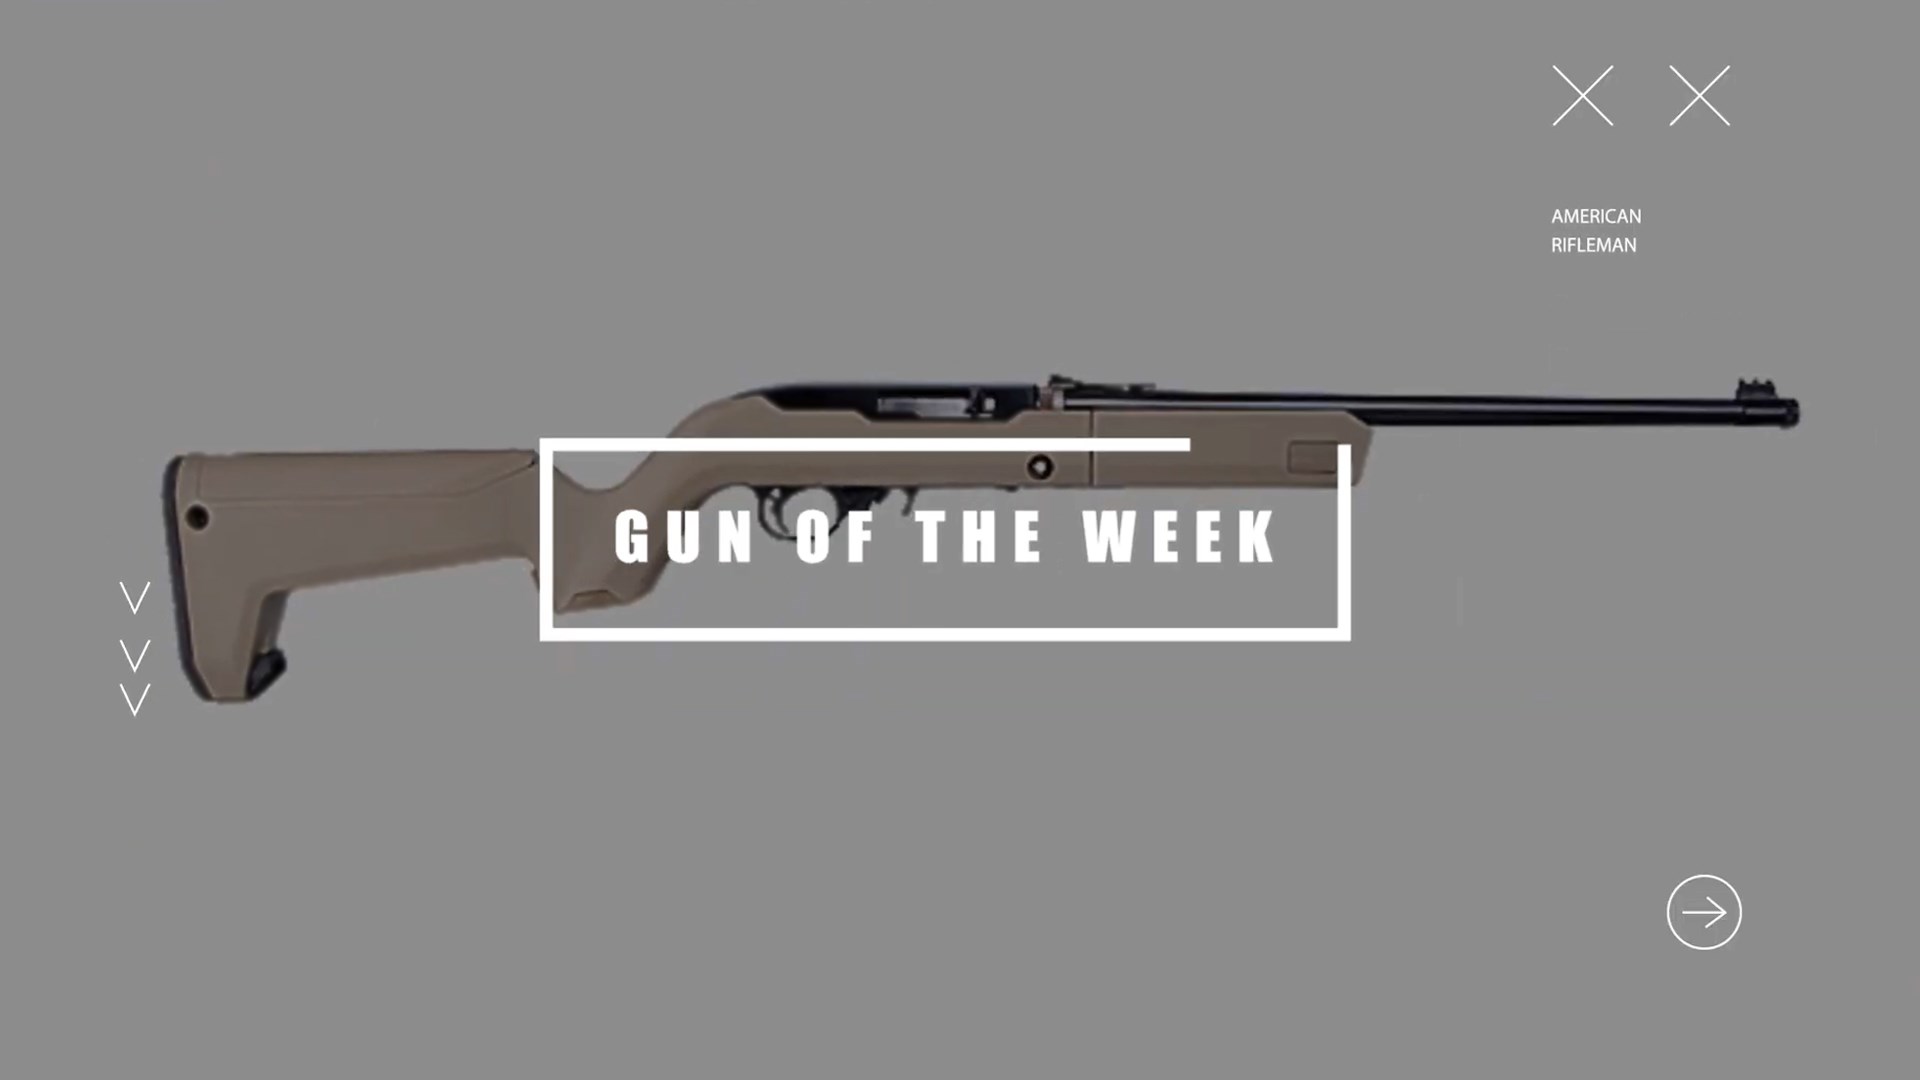 Ruger 10/22 Takedown FDE right-side view background image overlay GUN OF THE WEEK text on image AMERICAN RIFLEMAN title screen from video